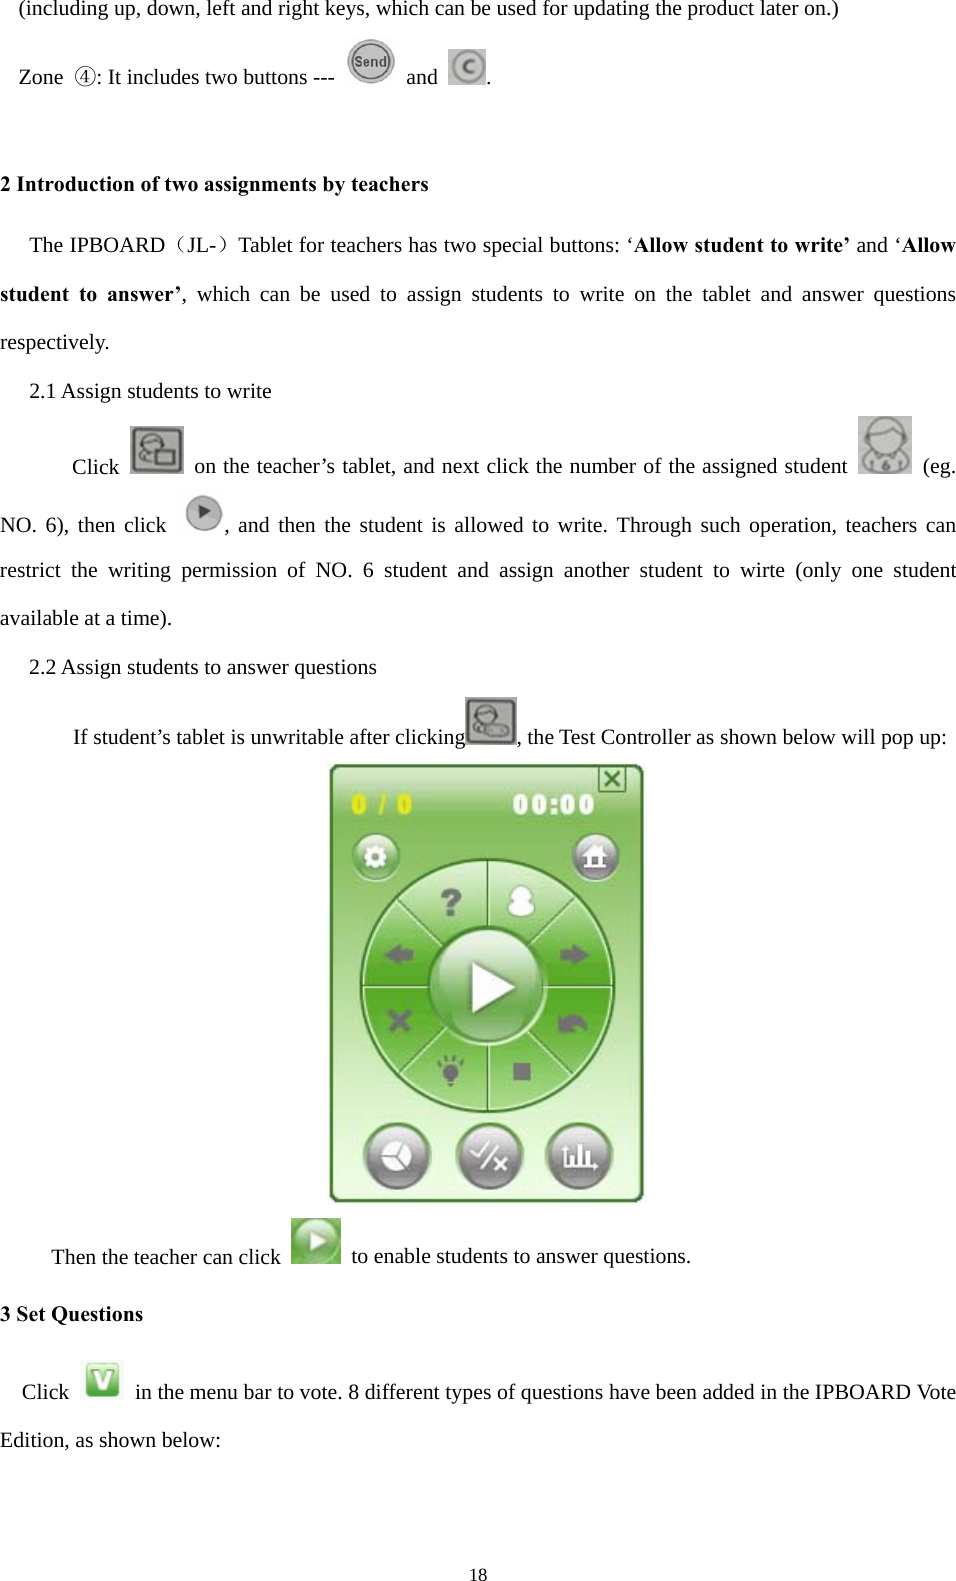  18(including up, down, left and right keys, which can be used for updating the product later on.) Zone  ④: It includes two buttons ---   and  .  2 Introduction of two assignments by teachers The IPBOARD（JL-）Tablet for teachers has two special buttons: ‘Allow student to write’ and ‘Allow student to answer’, which can be used to assign students to write on the tablet and answer questions respectively. 2.1 Assign students to write Click    on the teacher’s tablet, and next click the number of the assigned student   (eg. NO. 6), then click  , and then the student is allowed to write. Through such operation, teachers can restrict the writing permission of NO. 6 student and assign another student to wirte (only one student available at a time). 2.2 Assign students to answer questions         If student’s tablet is unwritable after clicking , the Test Controller as shown below will pop up:     Then the teacher can click    to enable students to answer questions. 3 Set Questions Click    in the menu bar to vote. 8 different types of questions have been added in the IPBOARD Vote Edition, as shown below: 